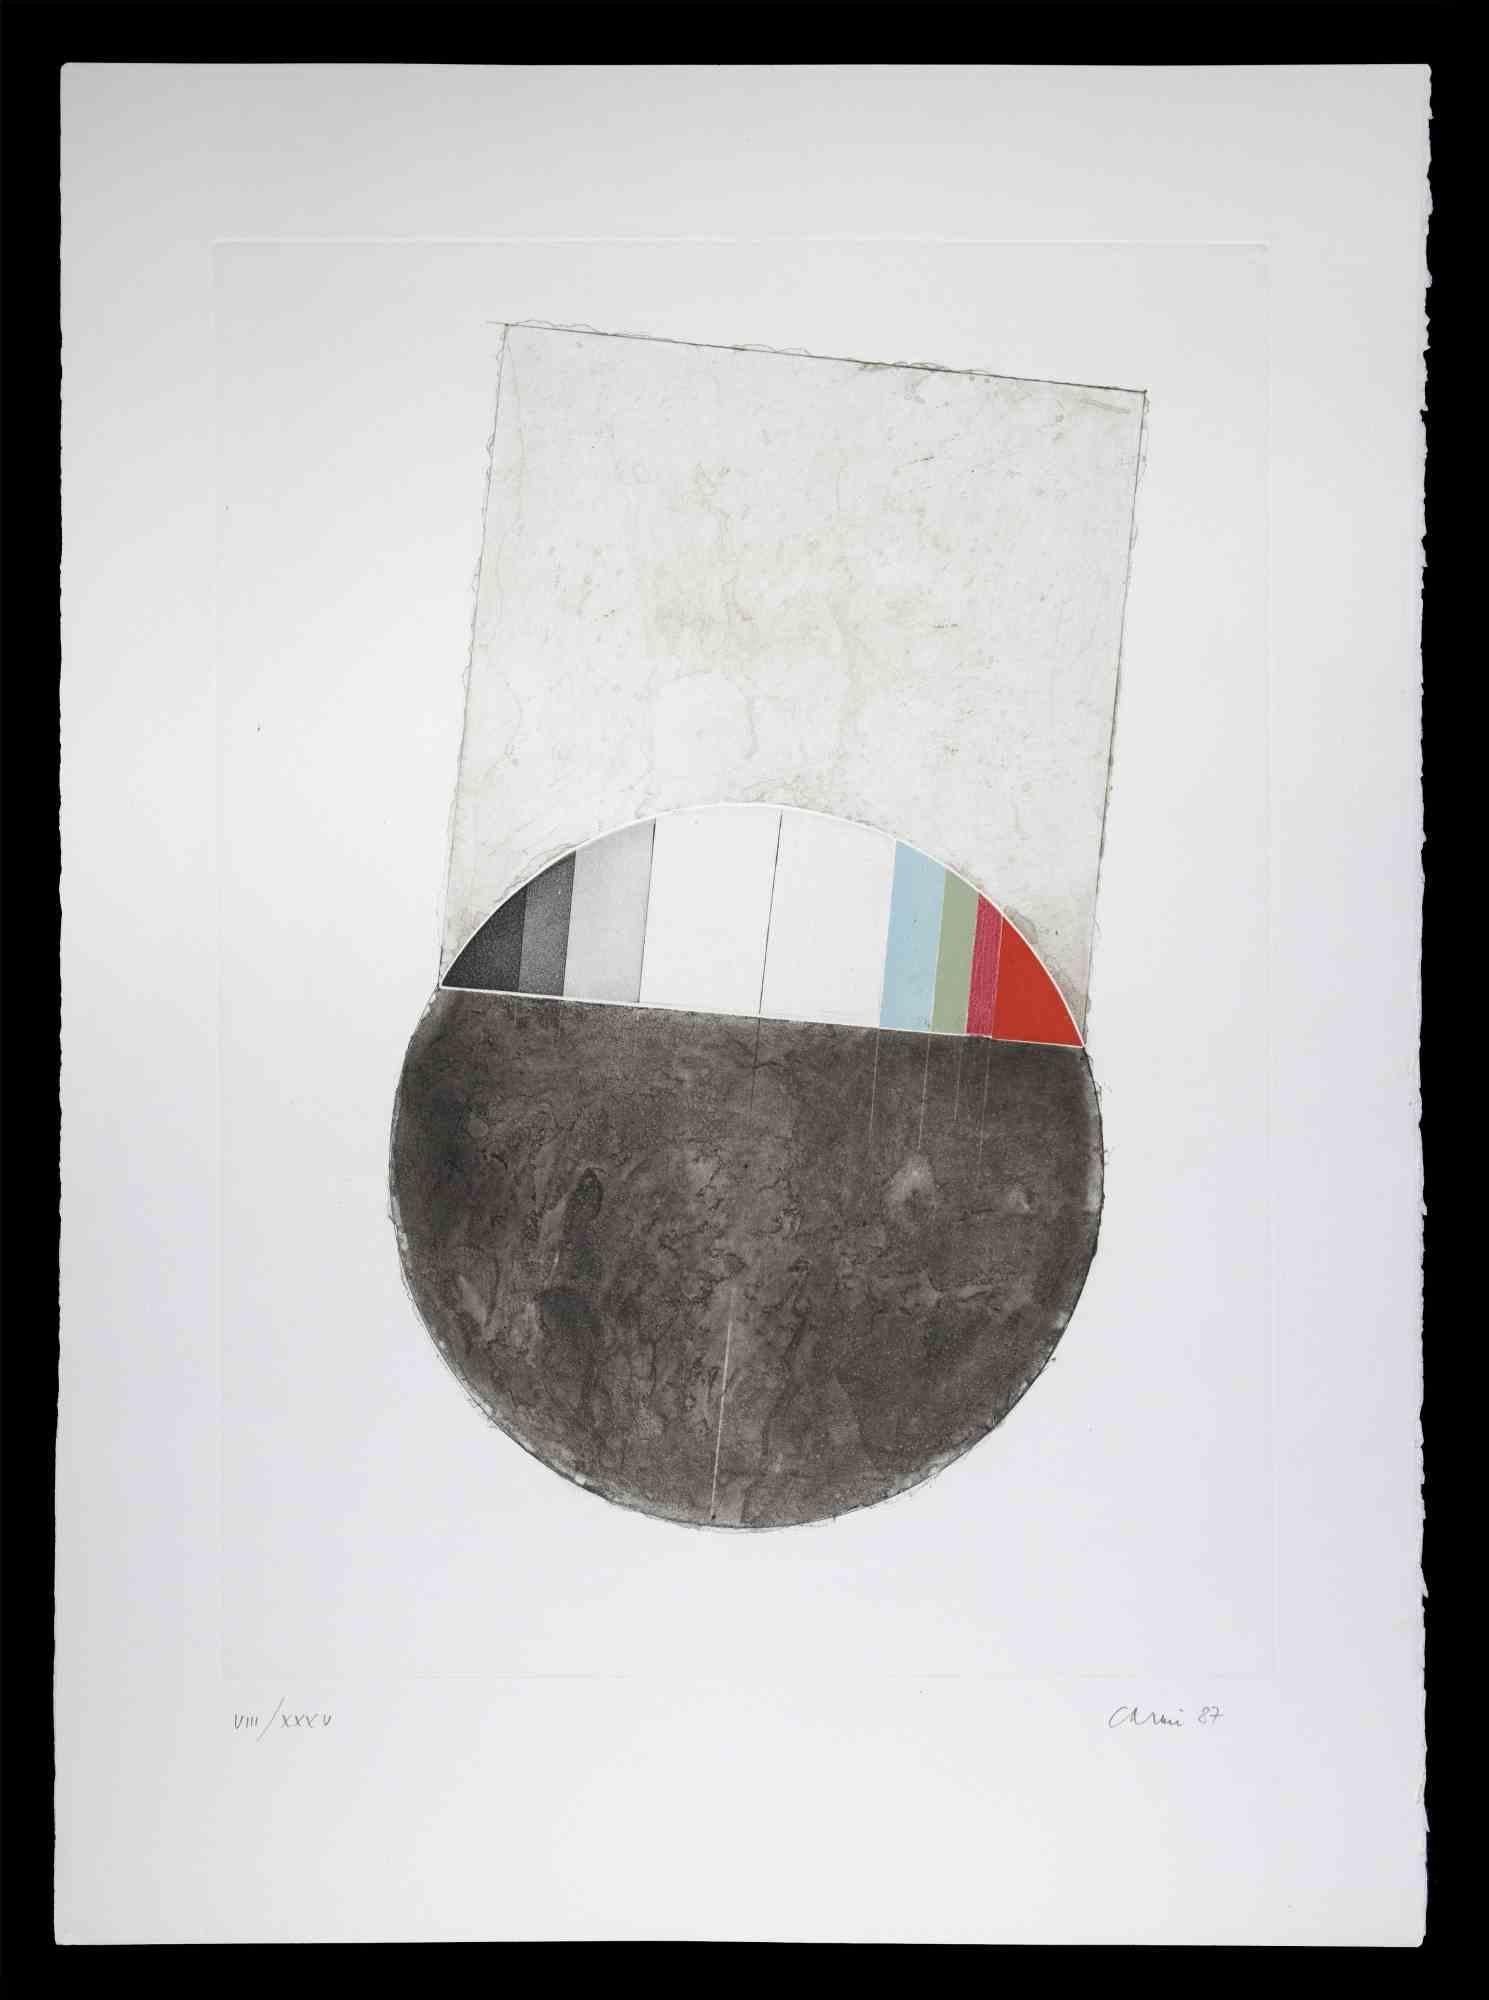 Abstract Composition is an original etching realized by Eugenio Carmi in 1987.

Good conditions

Numbered. Edition, VIII/XXXV.

The artwork is depicted in a well-balanced composition.